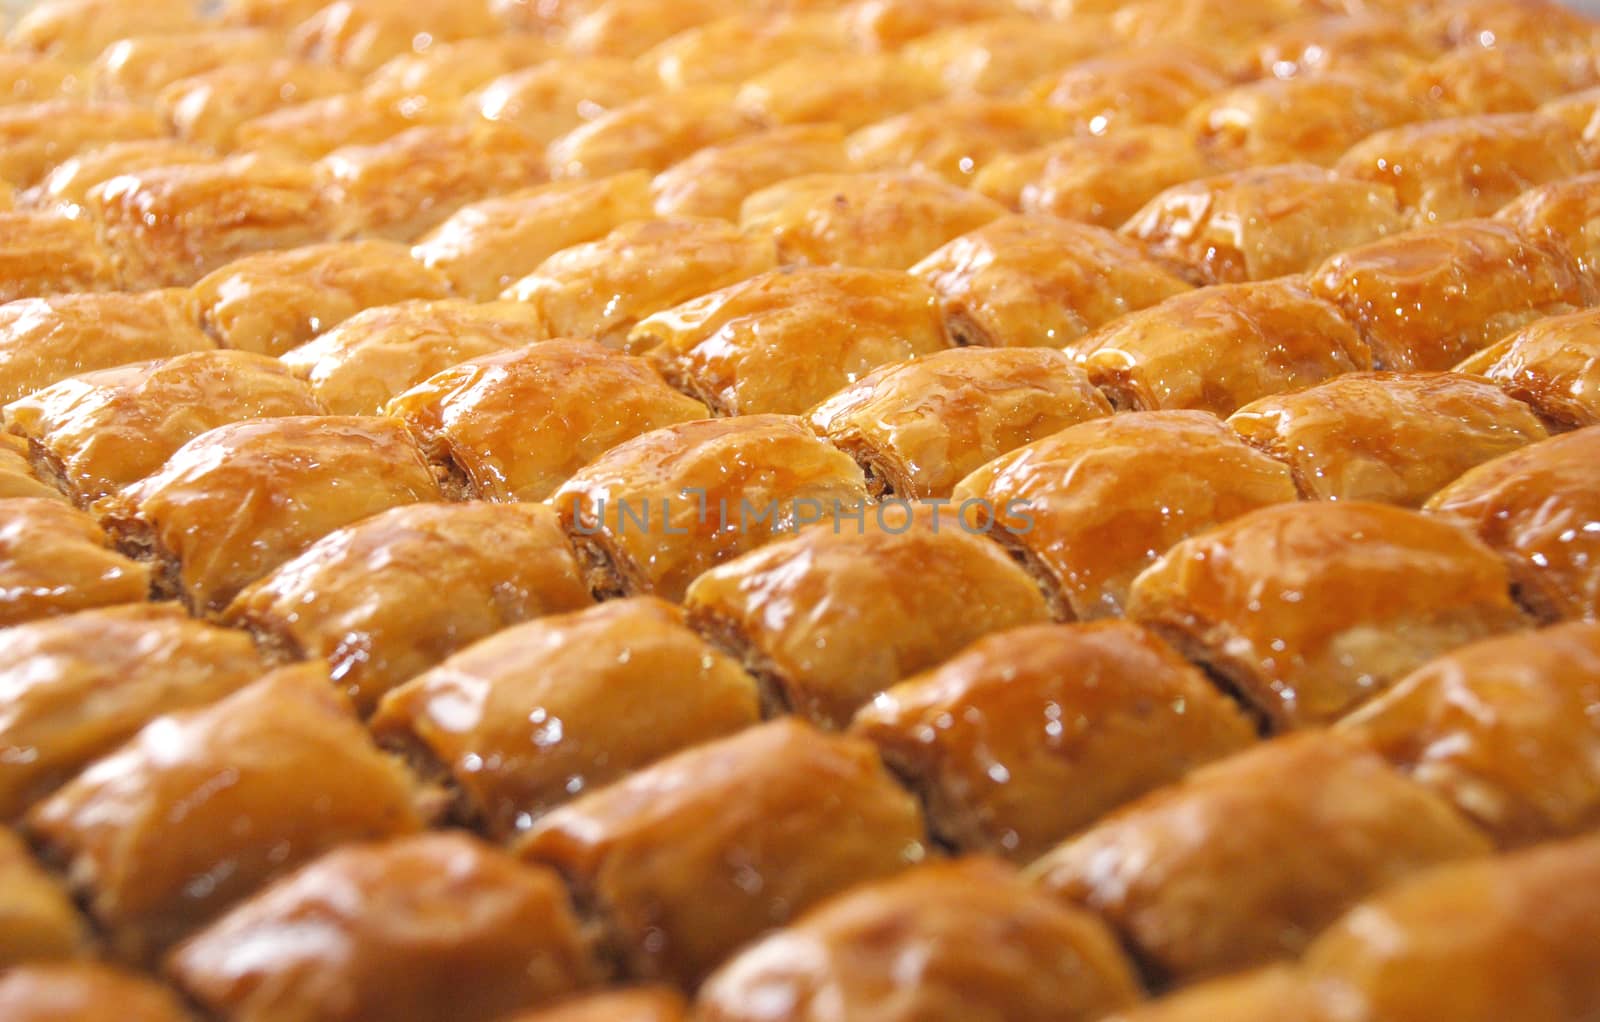 Presentation with Turkish baklava tea, also known in the Middle East.